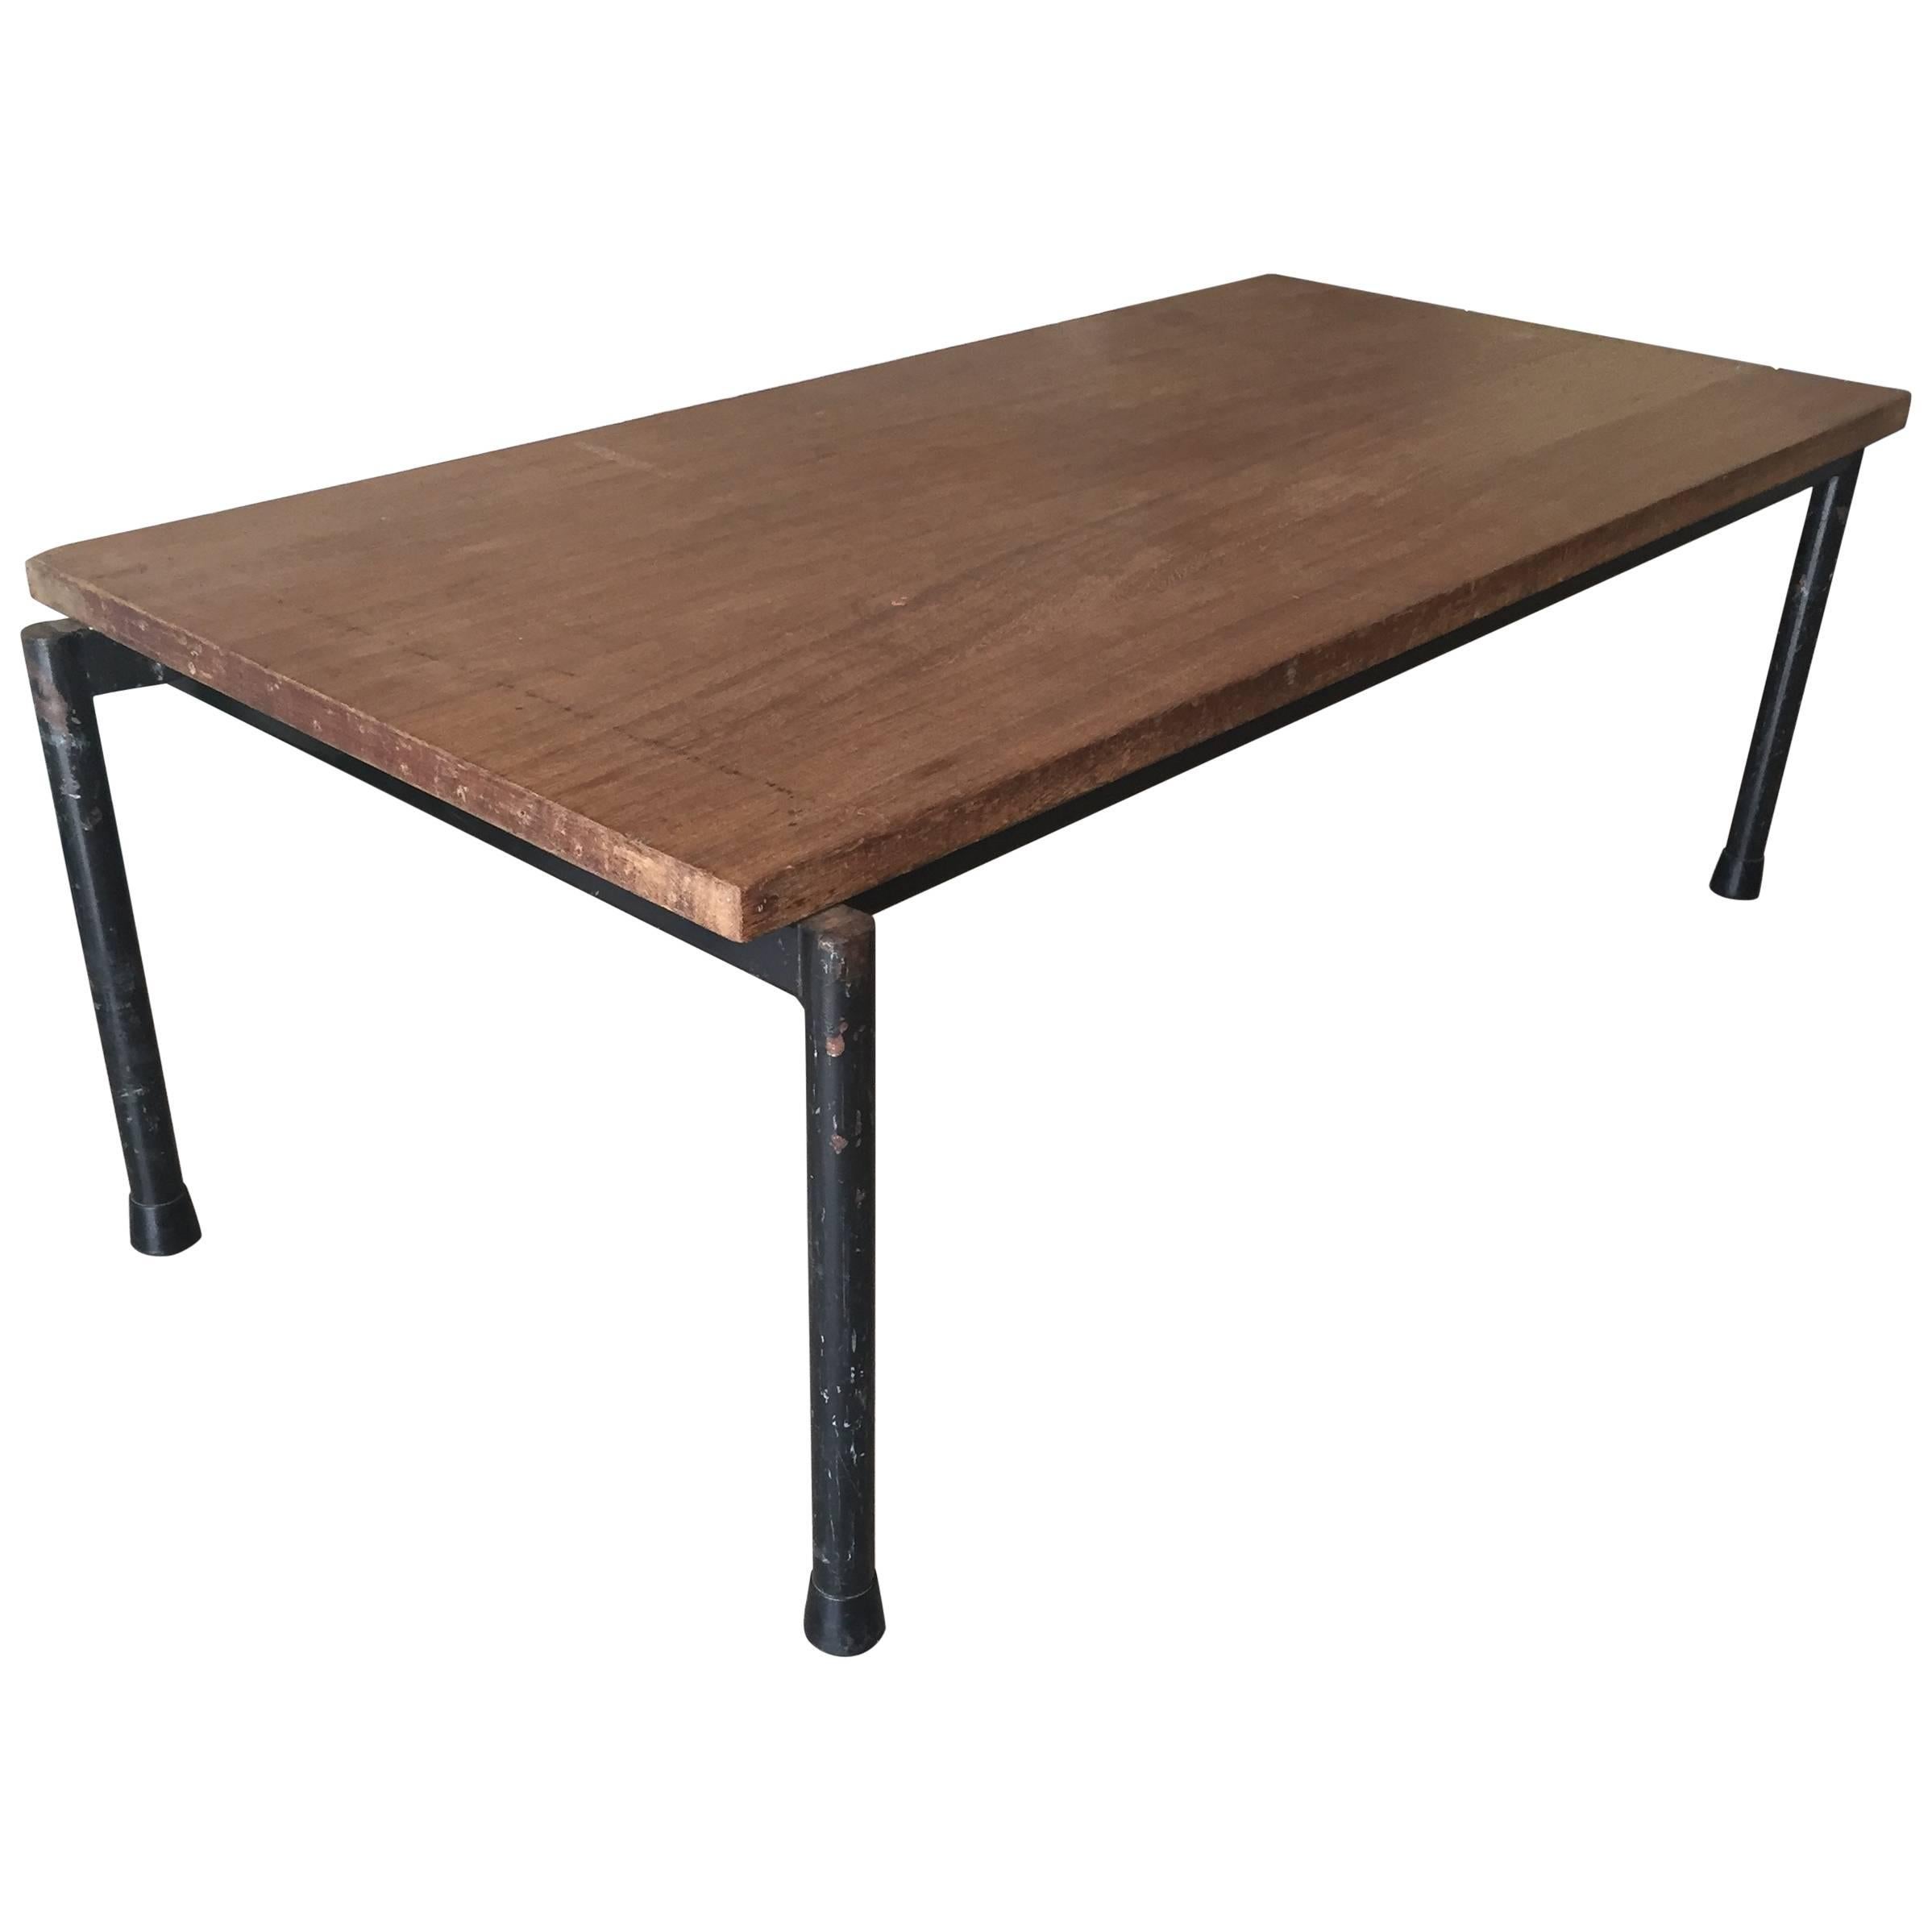 1950s Industrial Coffee Table Blacked Metal and Thick Solid Teak Wood Top For Sale